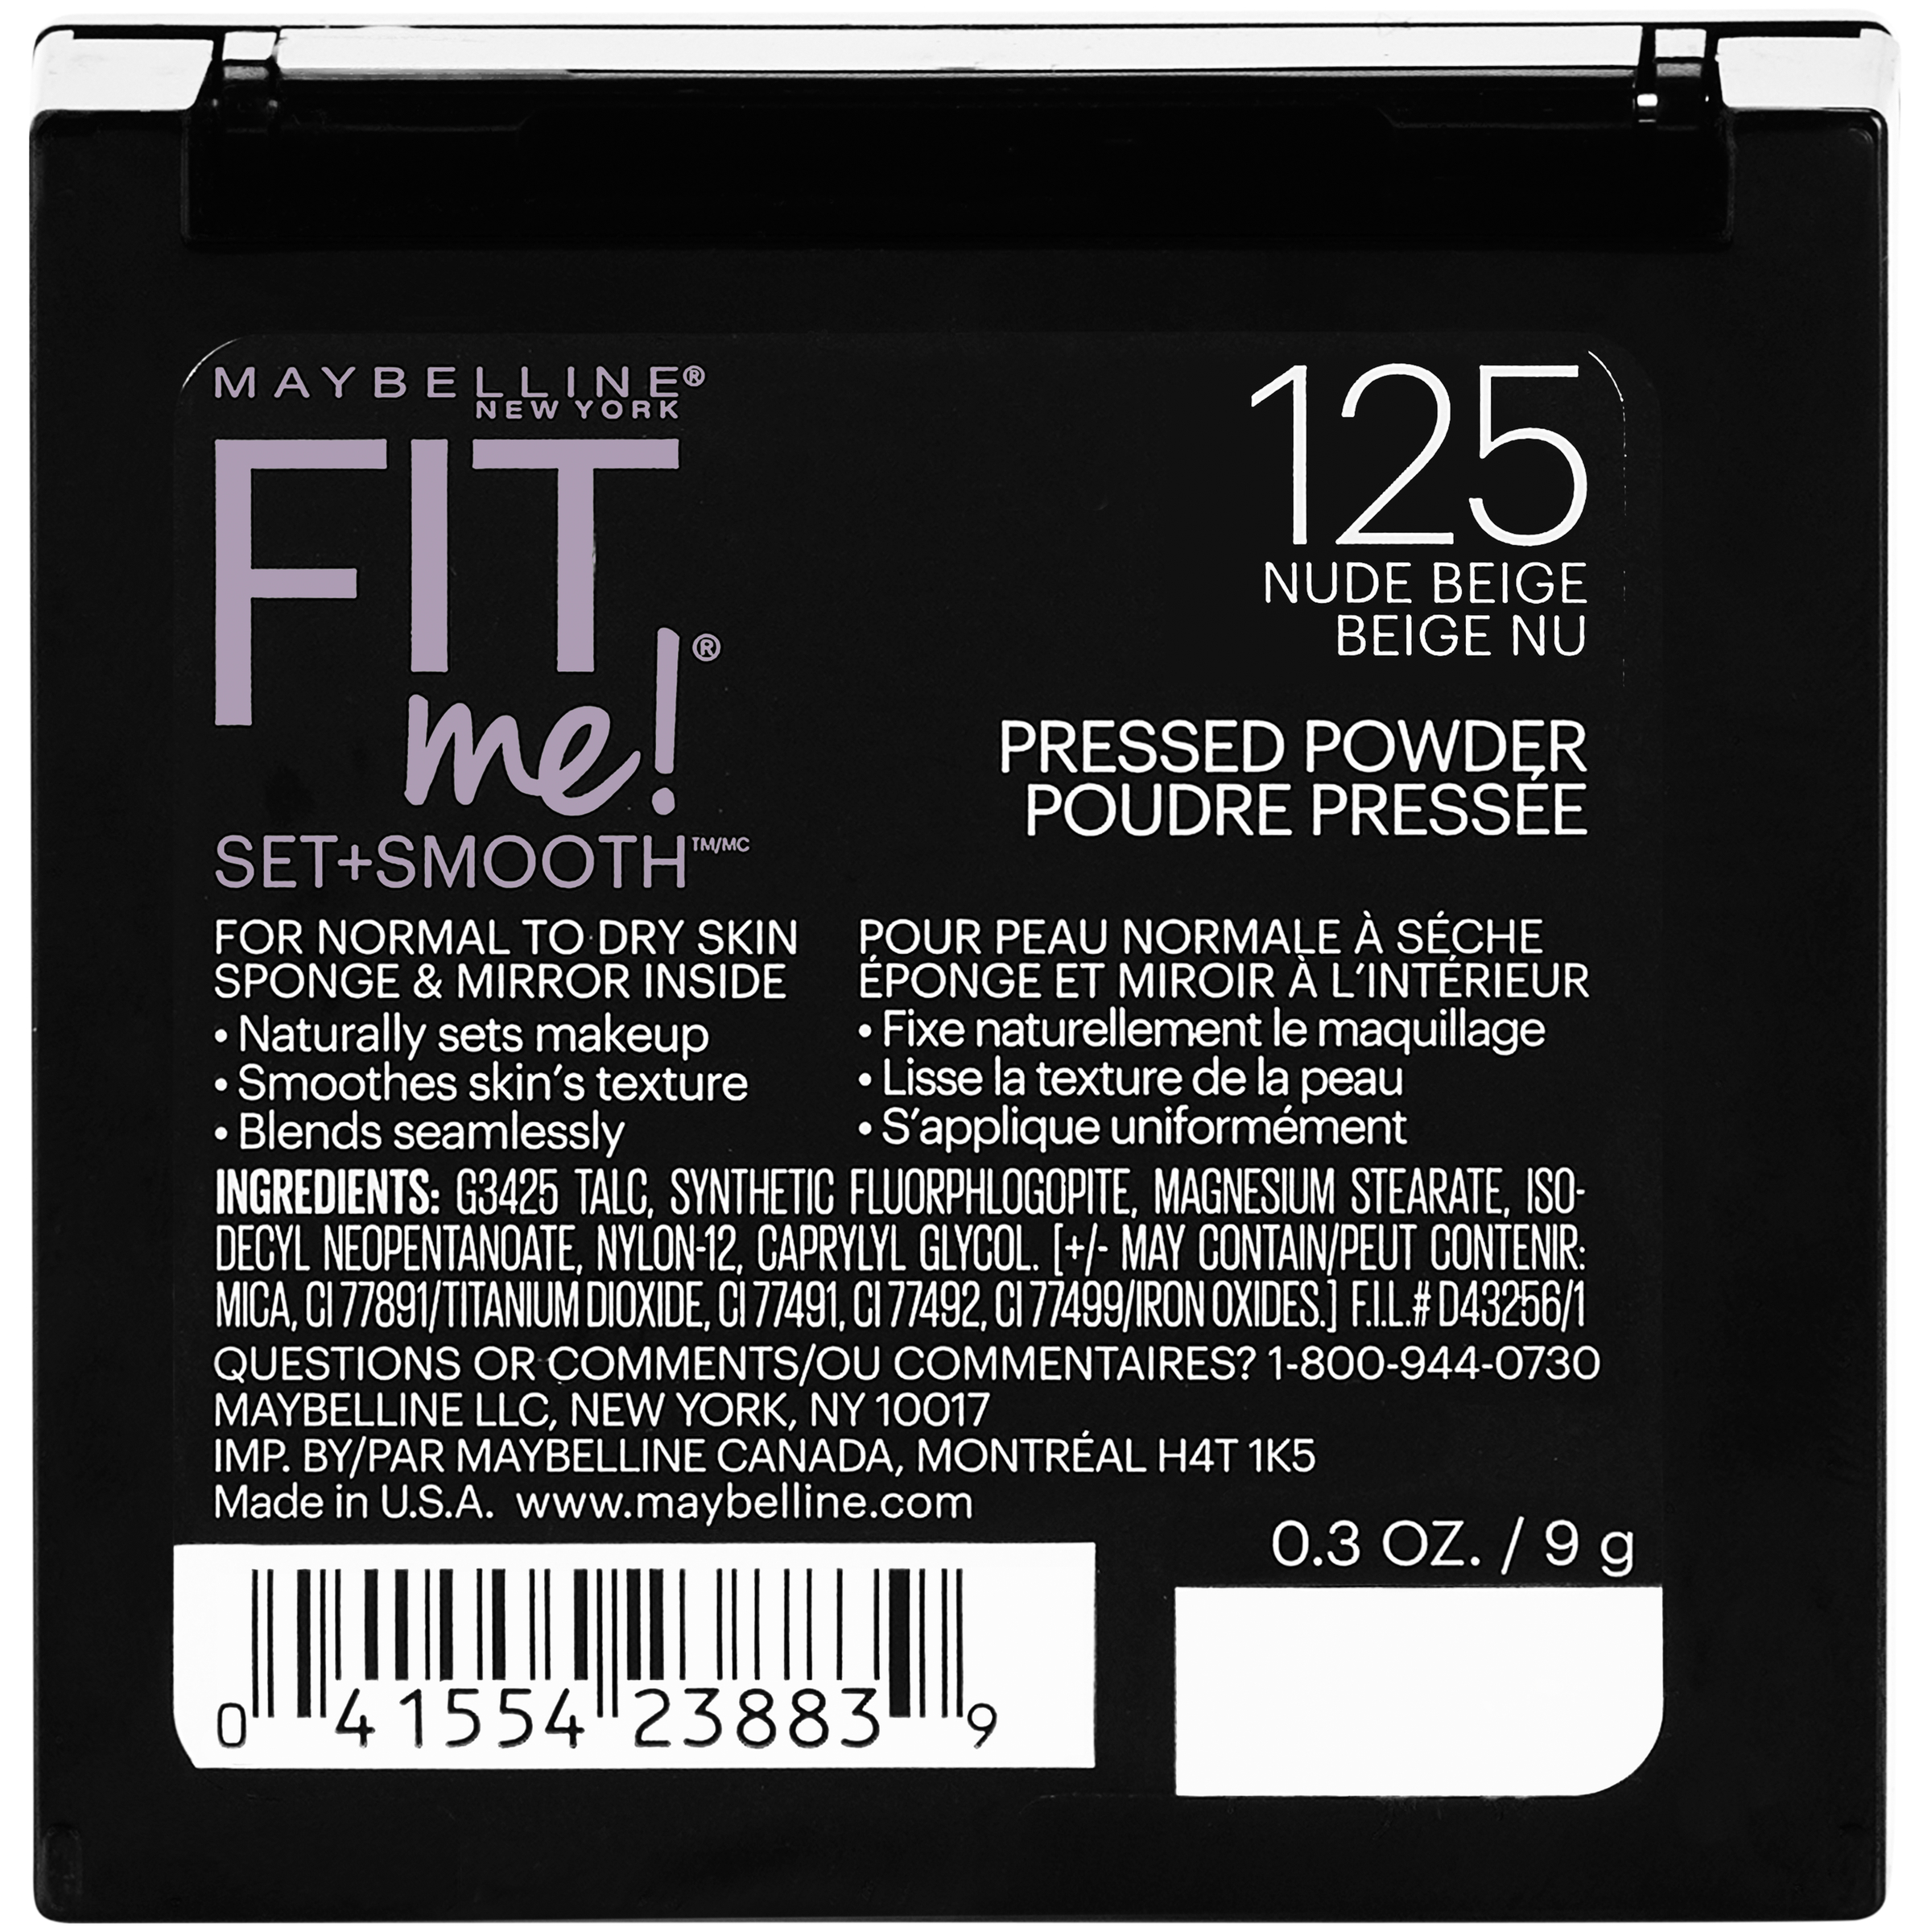 Maybelline Fit Me Set + Smooth Powder, Nude Beige - image 2 of 7